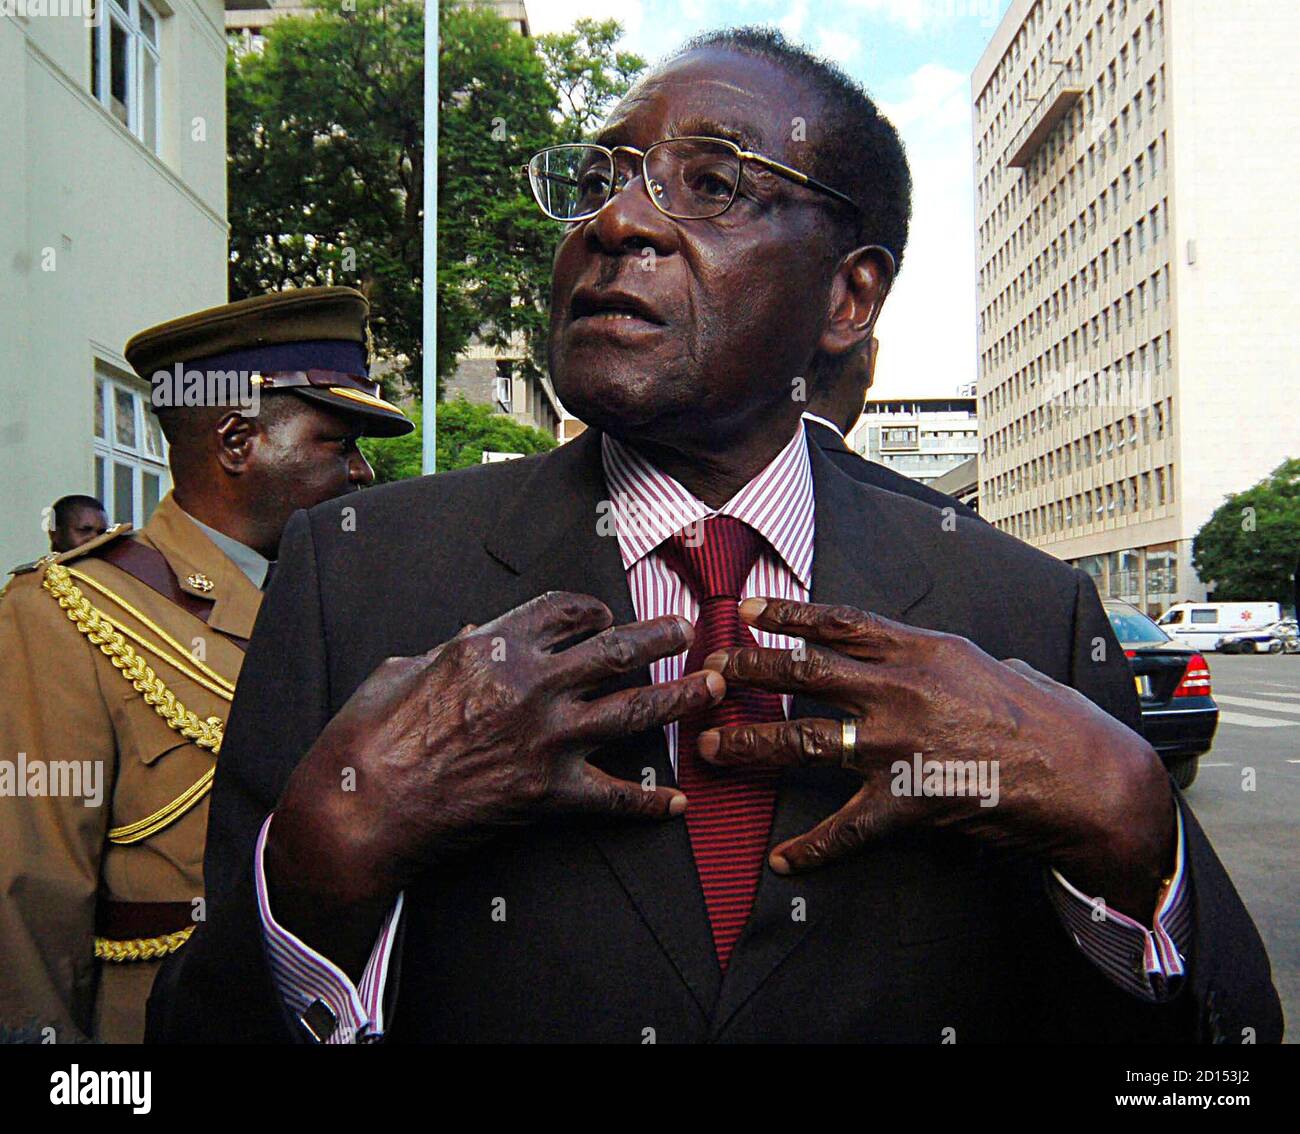 Zimbabwe's President Robert Mugabe speaks to journalists outside Parliament in Harare December 4, 2007. Mugabe said on Tuesday British efforts to isolate Zimbabwe were crumbling after London failed to have him excluded from an EU-Africa summit. REUTERS/Philimon Bulawayo (ZIMBABWE) Stock Photo